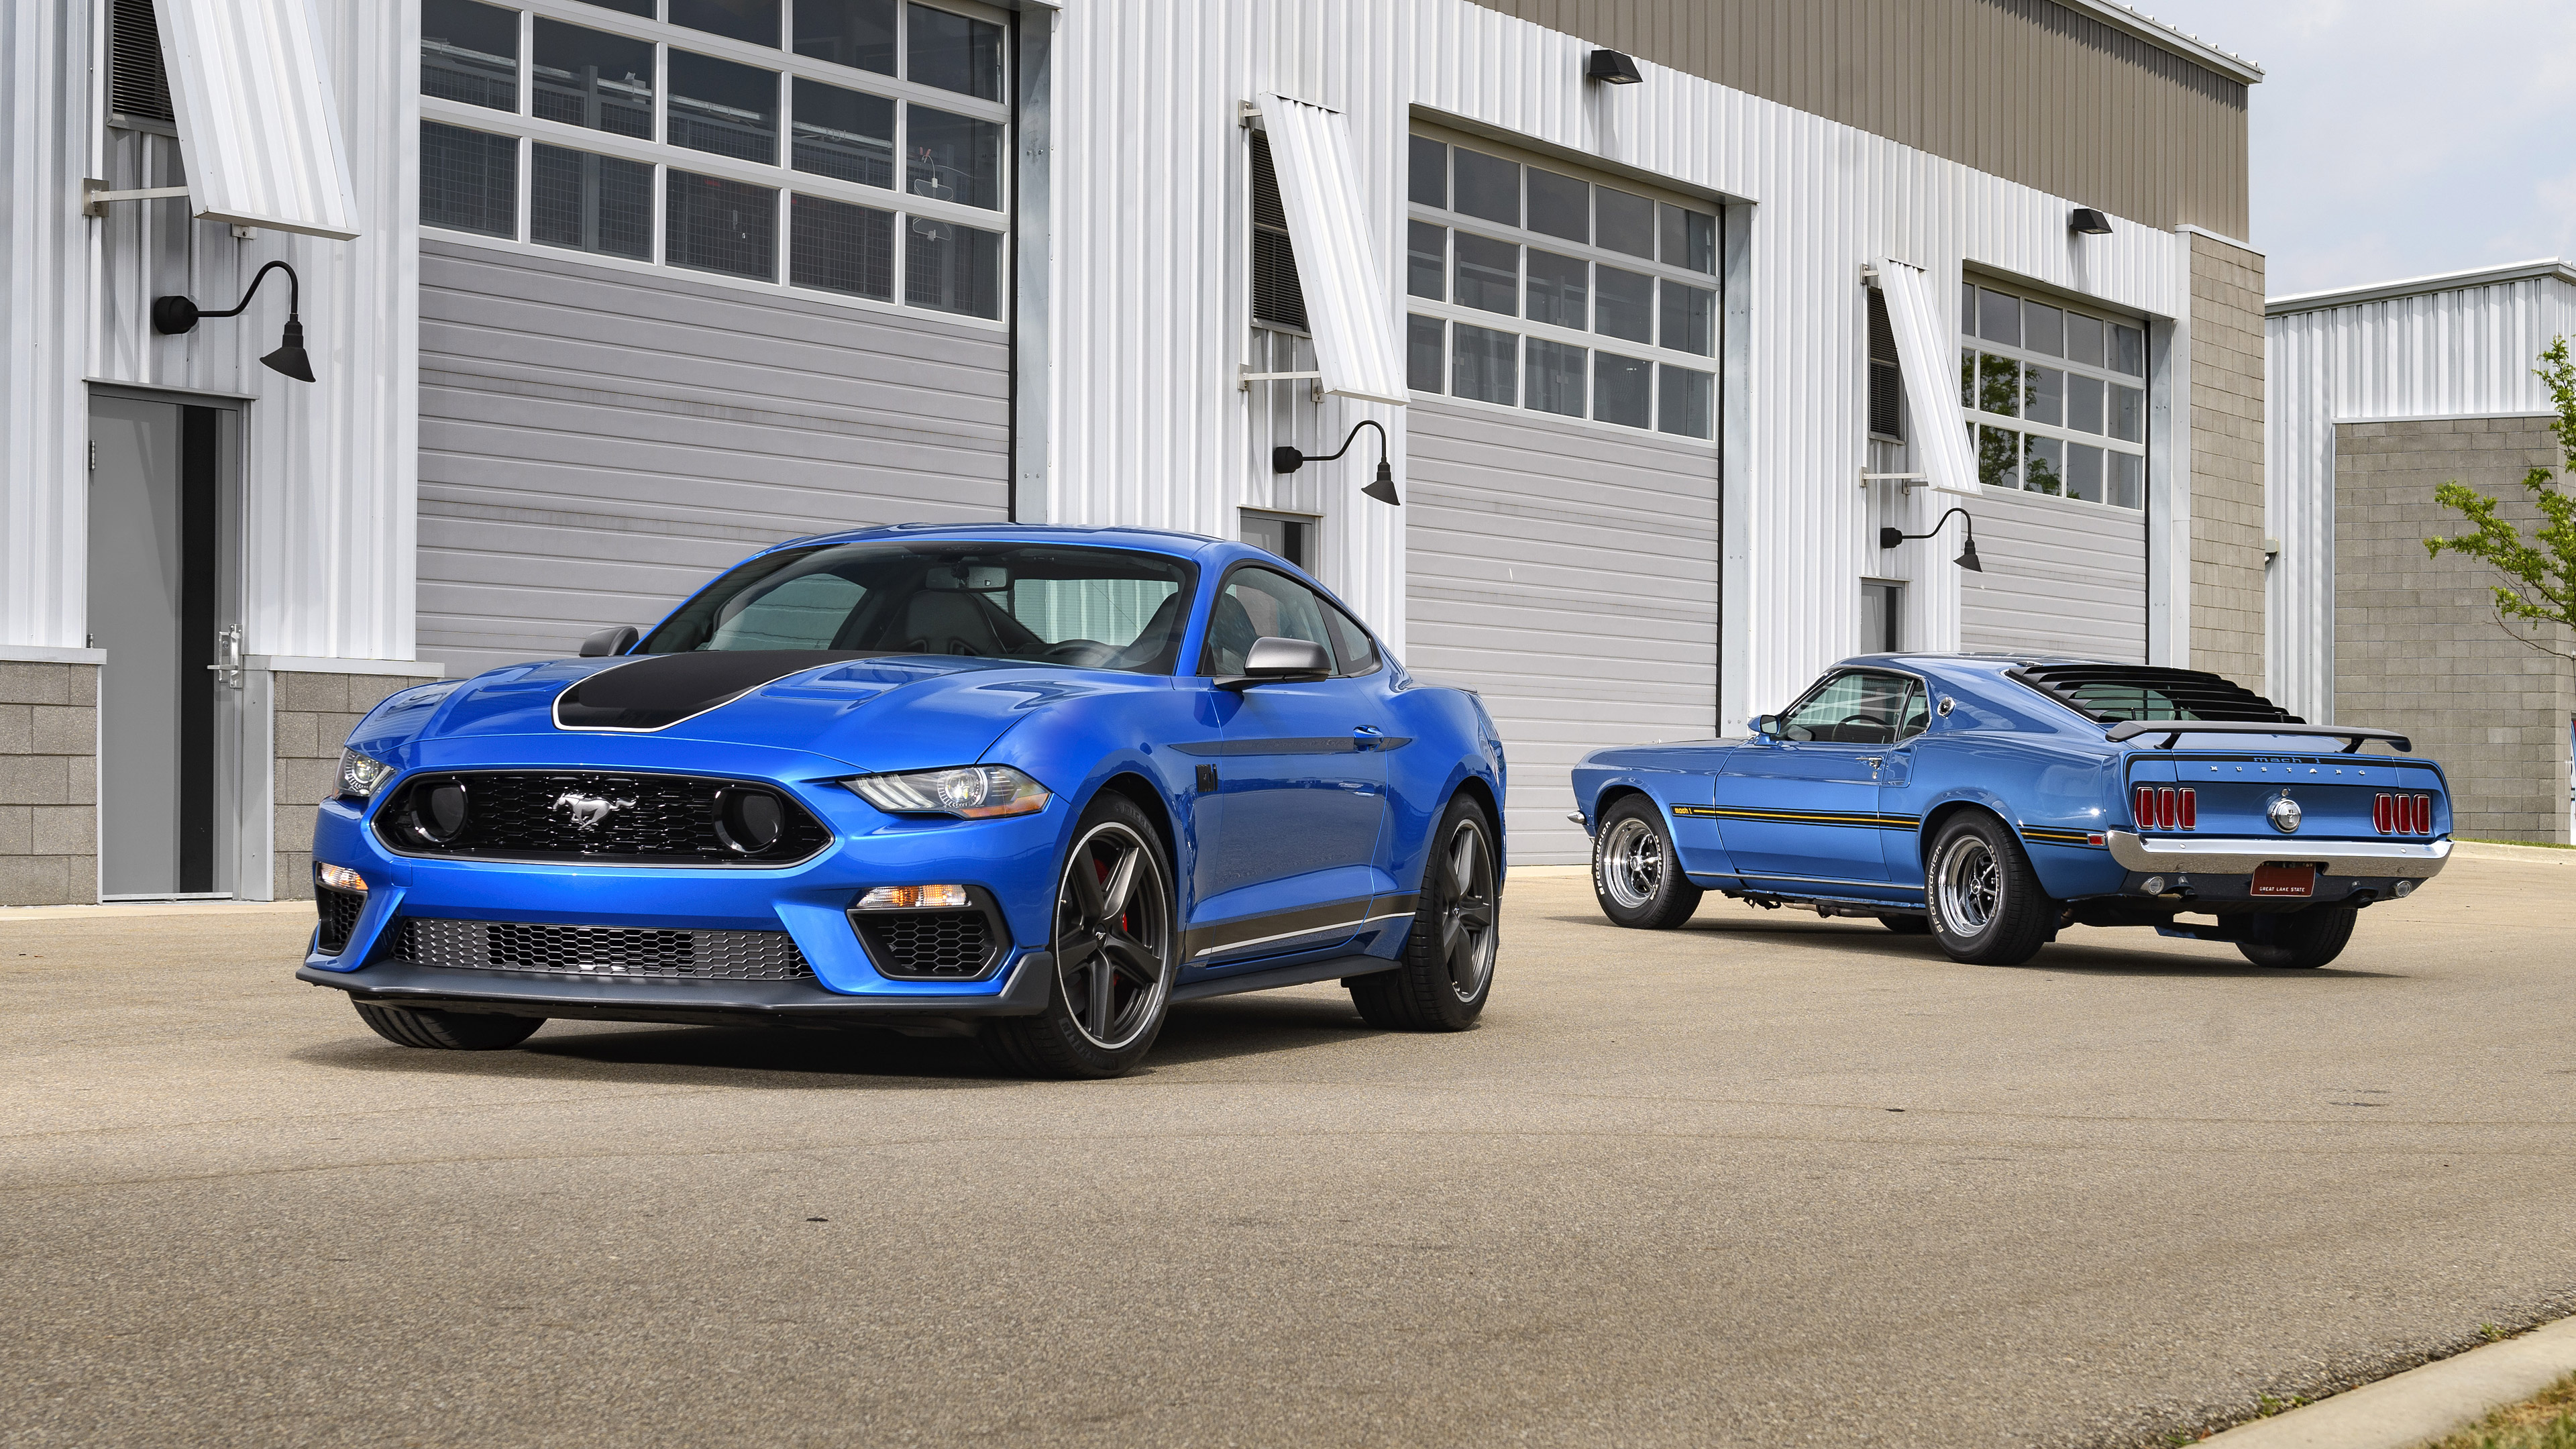 General 3840x2160 Ford Mustang Mach 1 car Ford Mustang muscle cars vehicle blue cars American cars Ford Mustang S550 Ford classic car